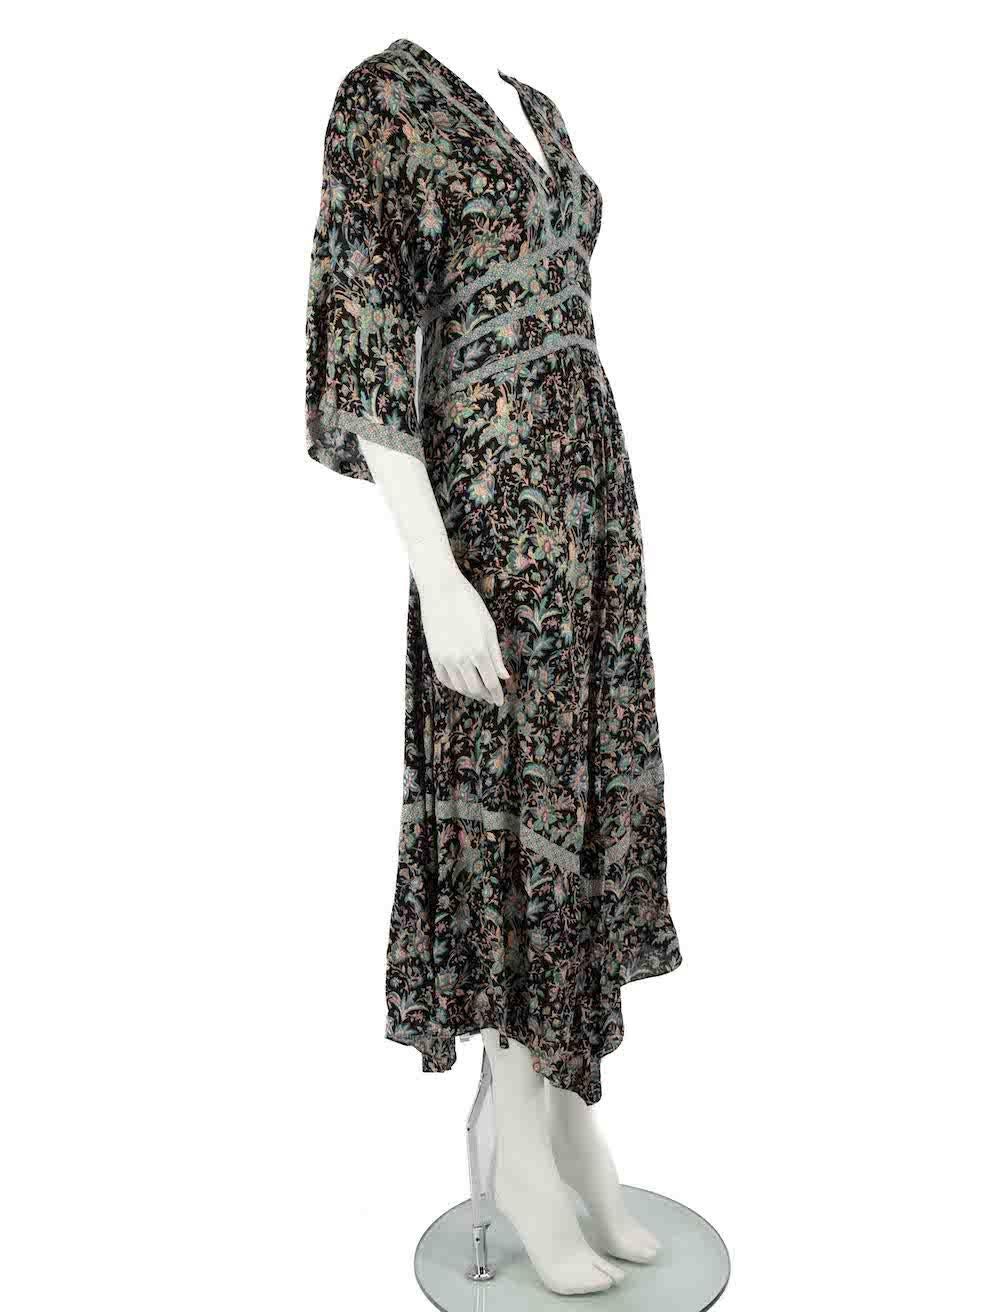 CONDITION is Never worn, with tags. No visible wear to dress is evident on this new ba&sh designer resale item.
 
 
 
 Details
 
 
 Multicolour
 
 Viscose
 
 Dress
 
 Floral pattern
 
 3/4 Length sleeves
 
 V-neck
 
 Midi
 
 Back tie fastening
 
